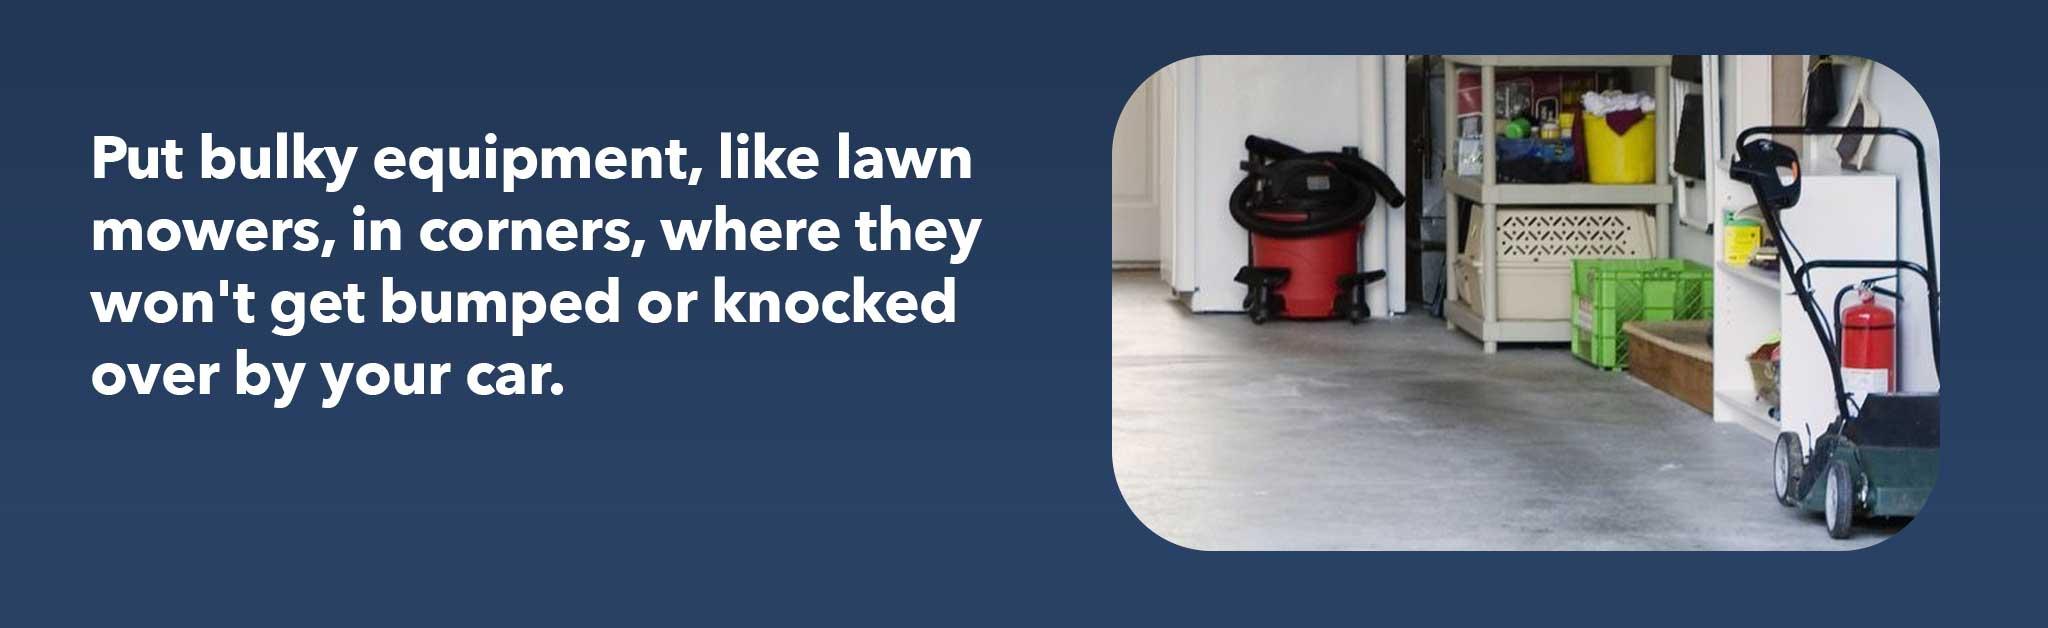 Put bulky equipment, like lawn mowers, in corners, where they won't get bumped or knocked over by your car.